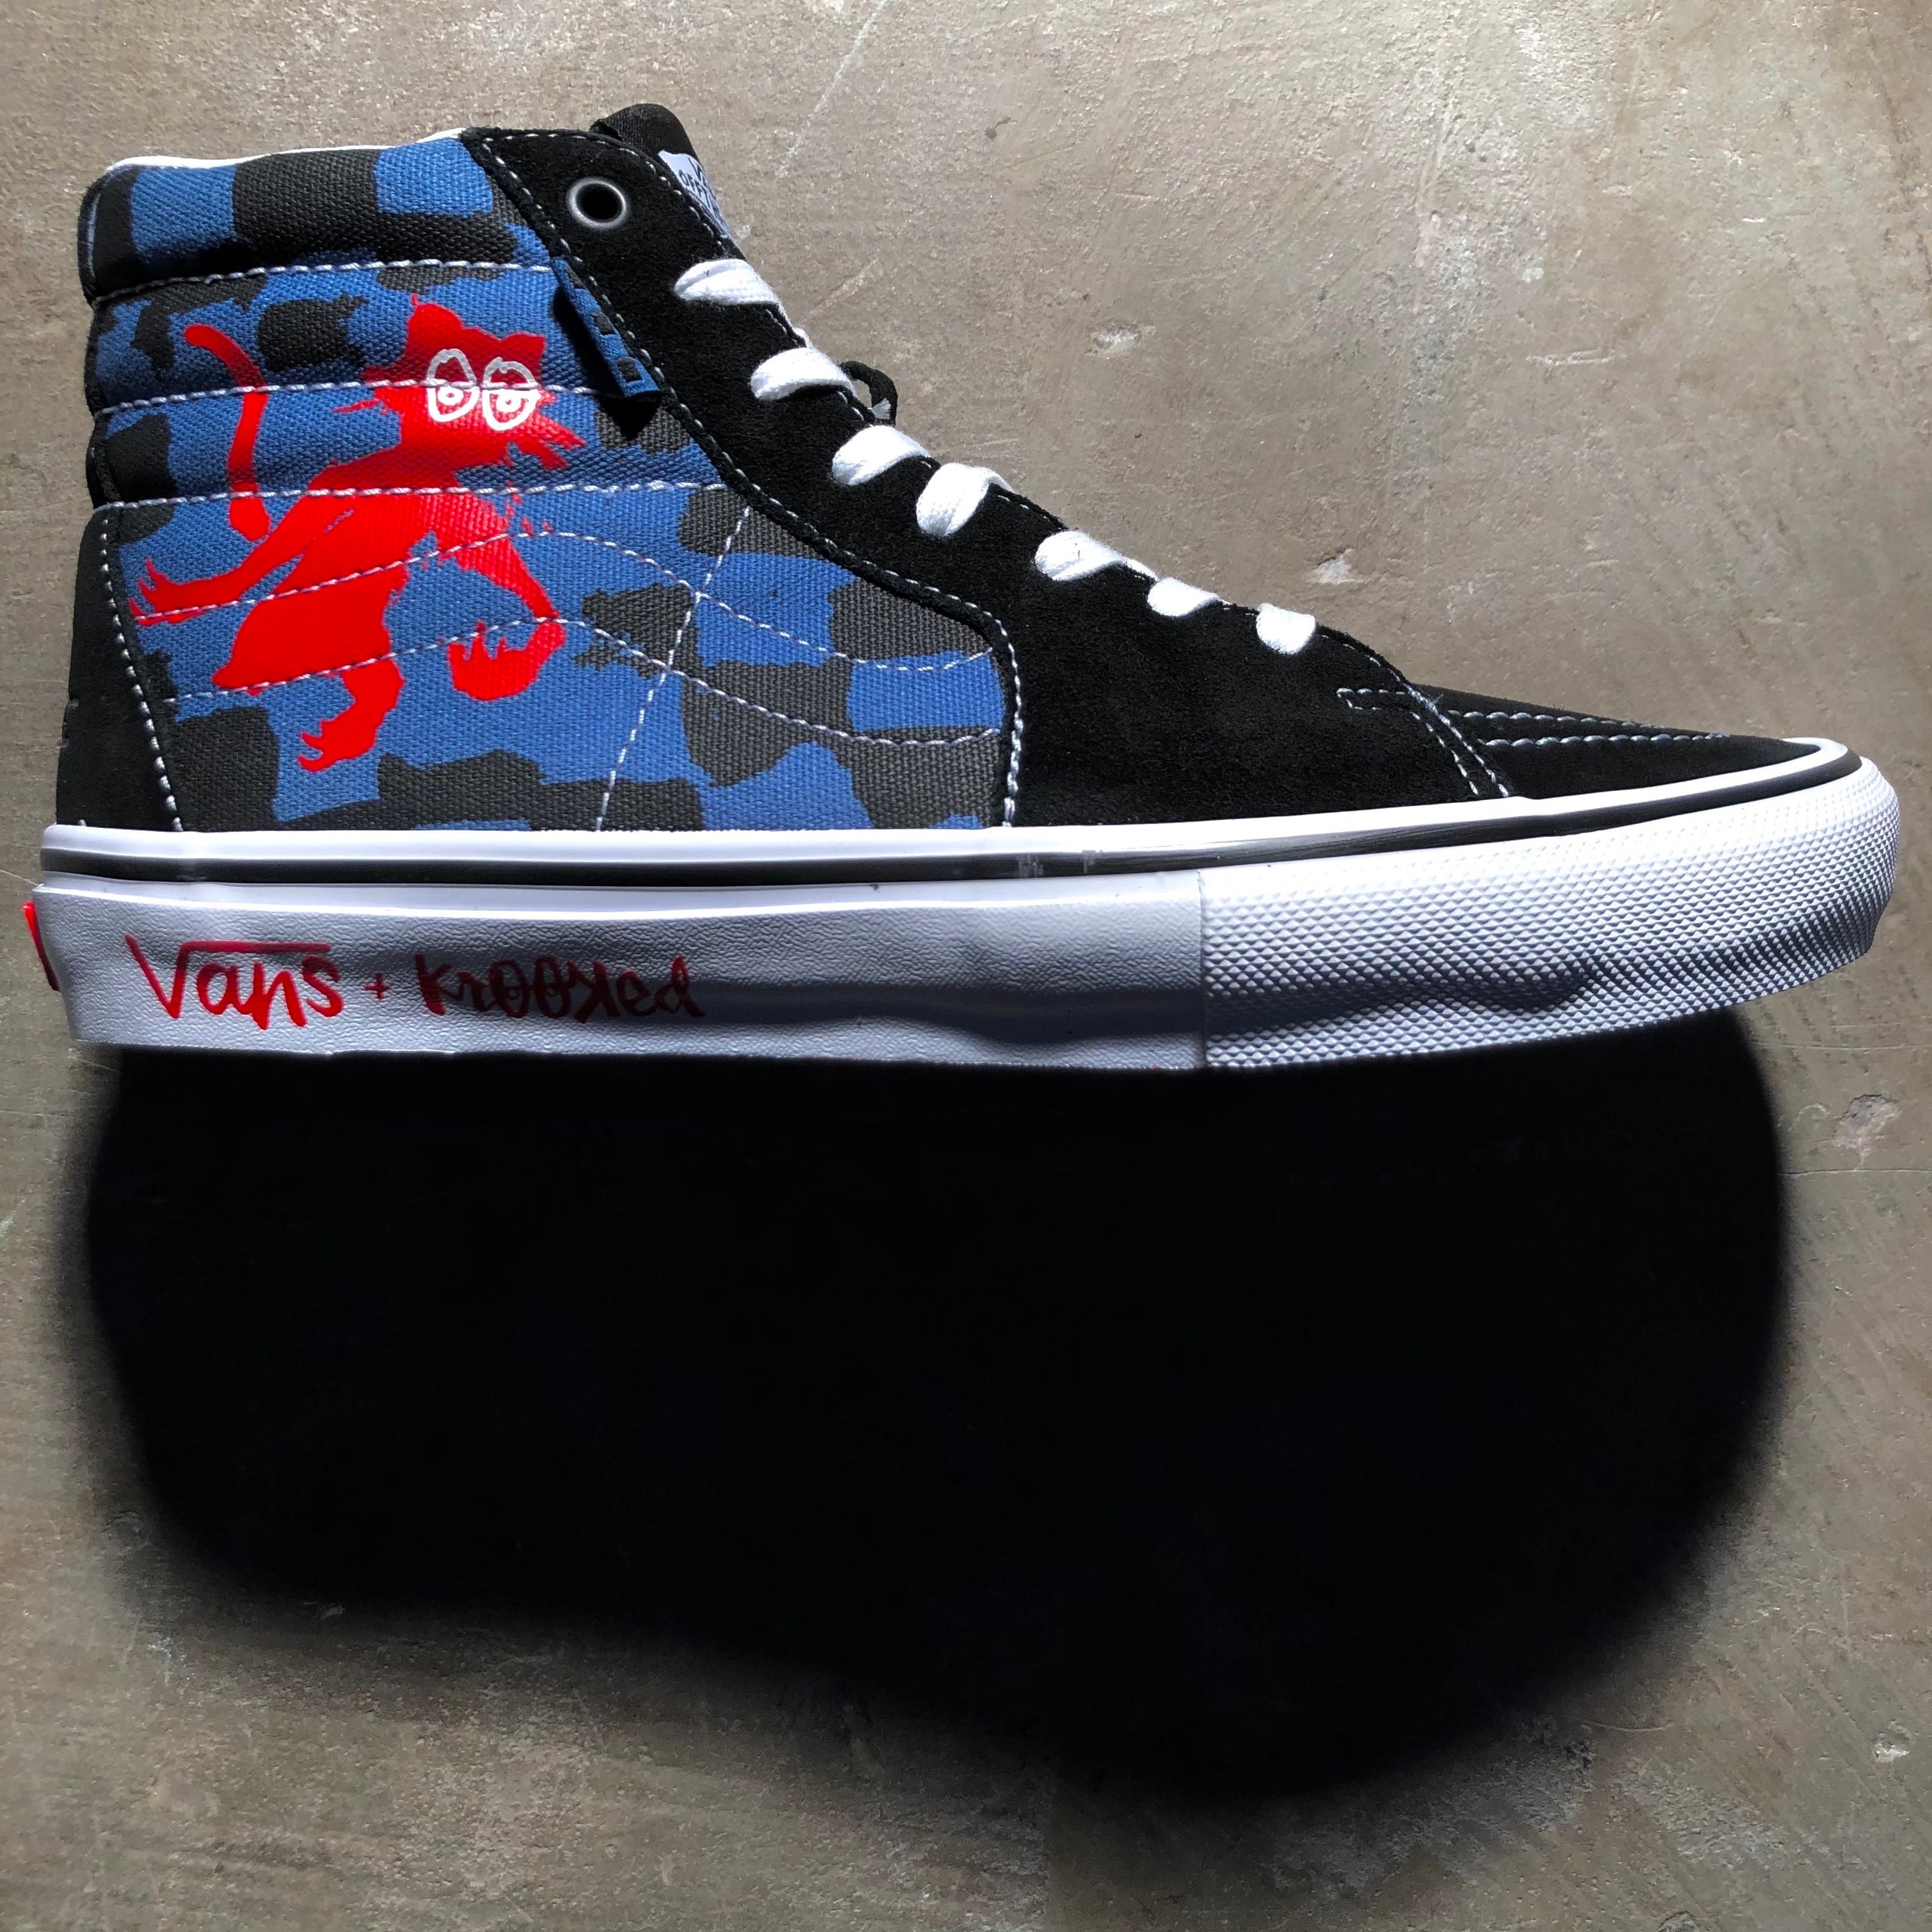 Vans Shoes and Gear | The Block Skate Supply